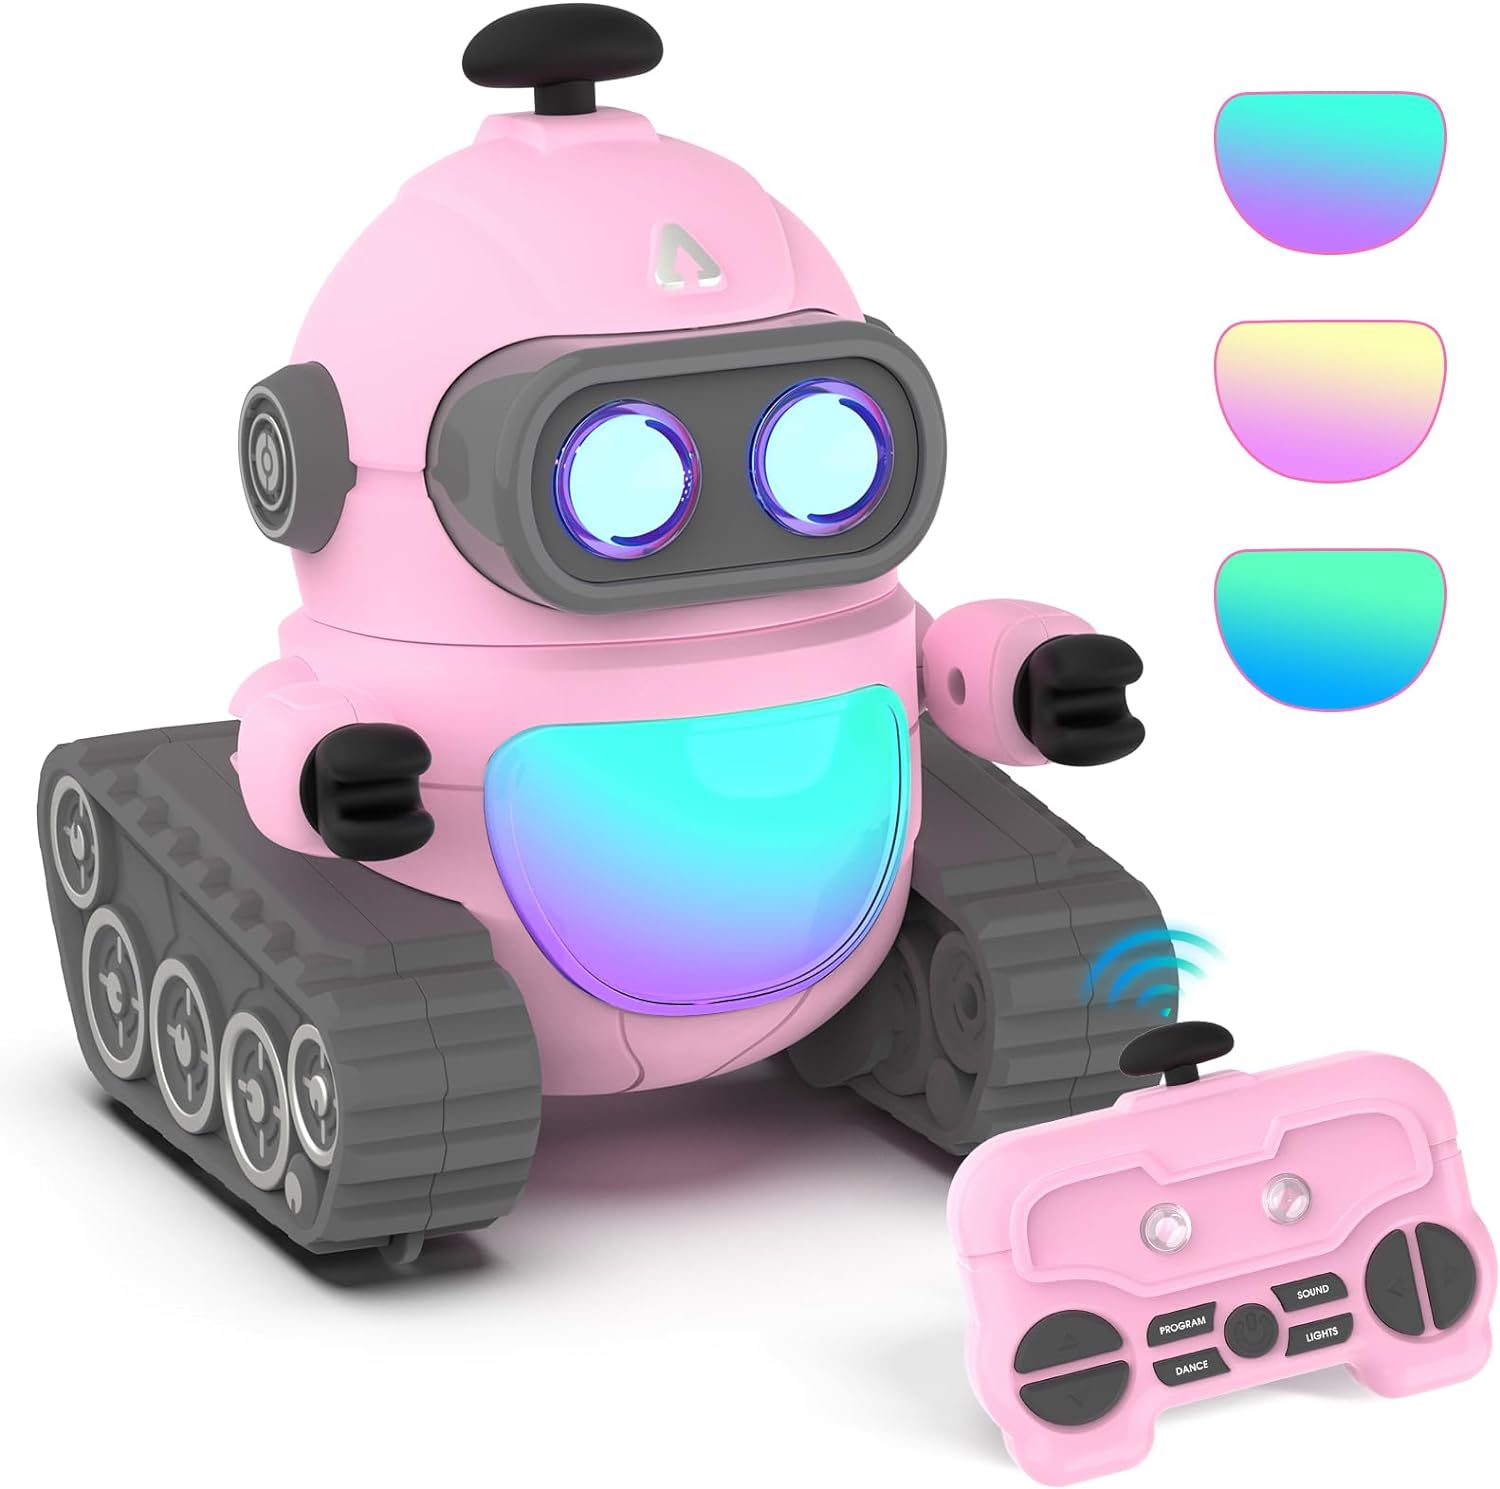 Robot Toys for Girls, Rechargeable Remote Control Robot Toy for Kids, Programmable RC Robots with LED Eyes